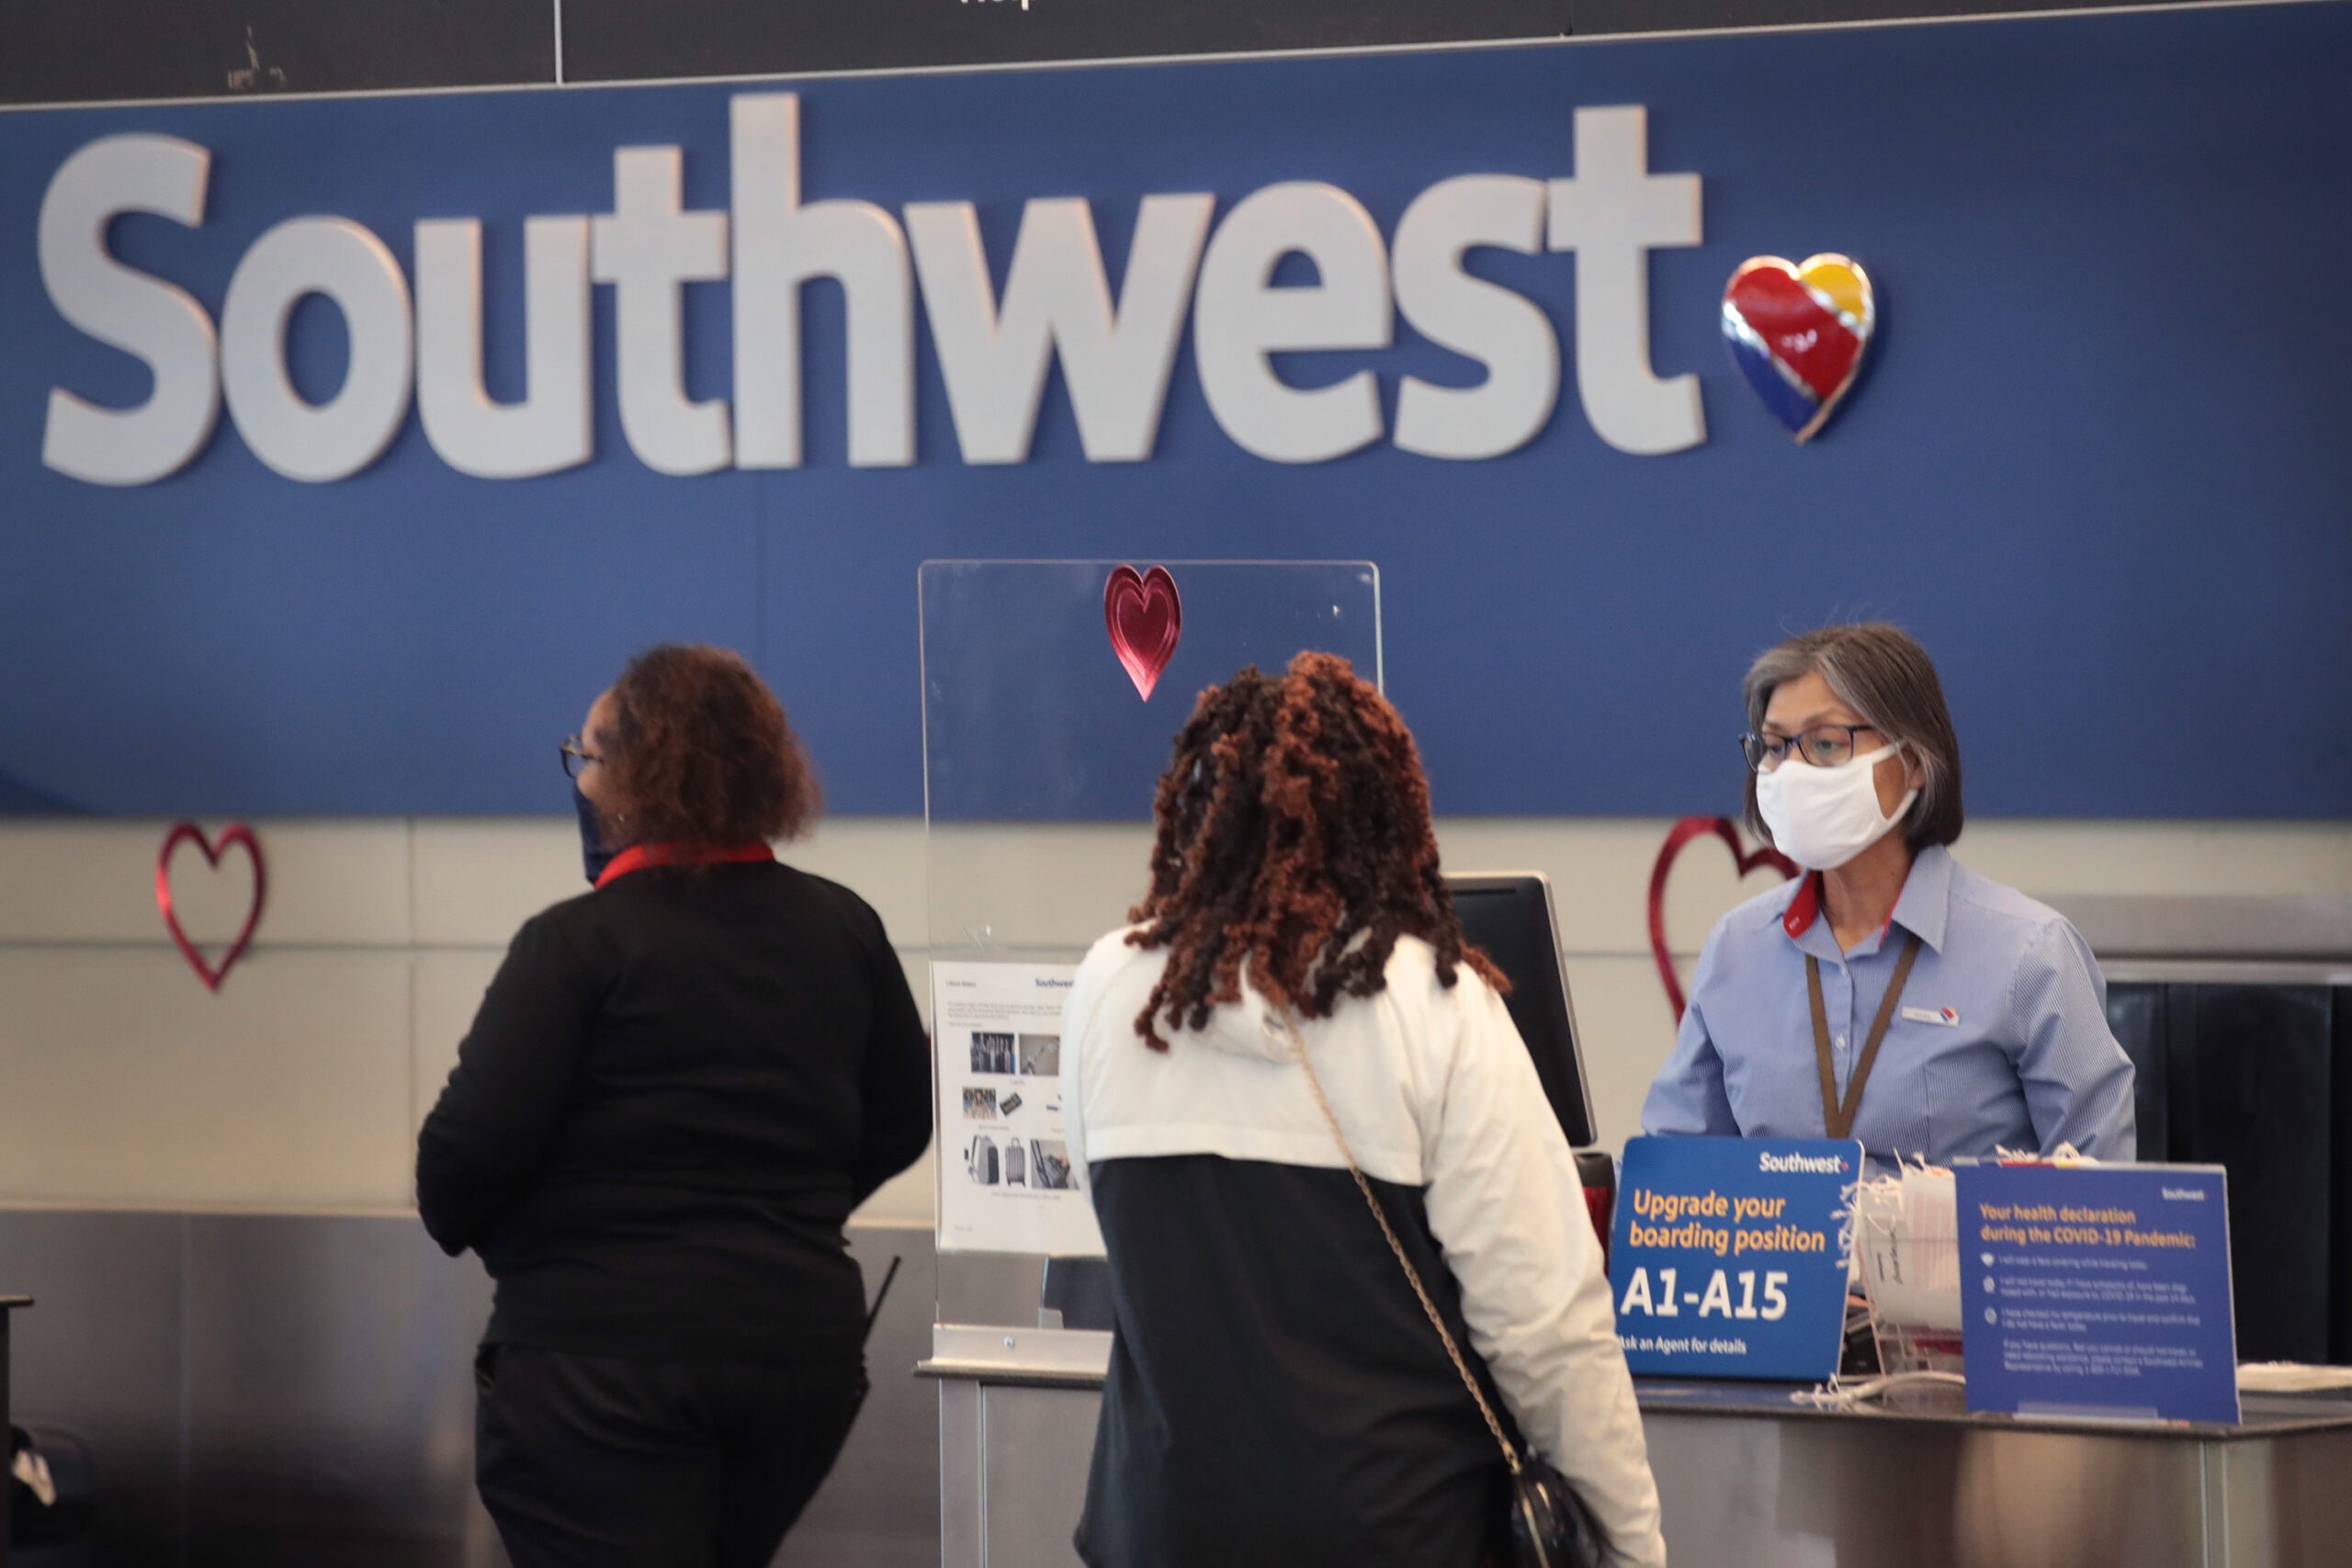 Southwest CEO defends mask requirements, says pandemic cleanup should remain